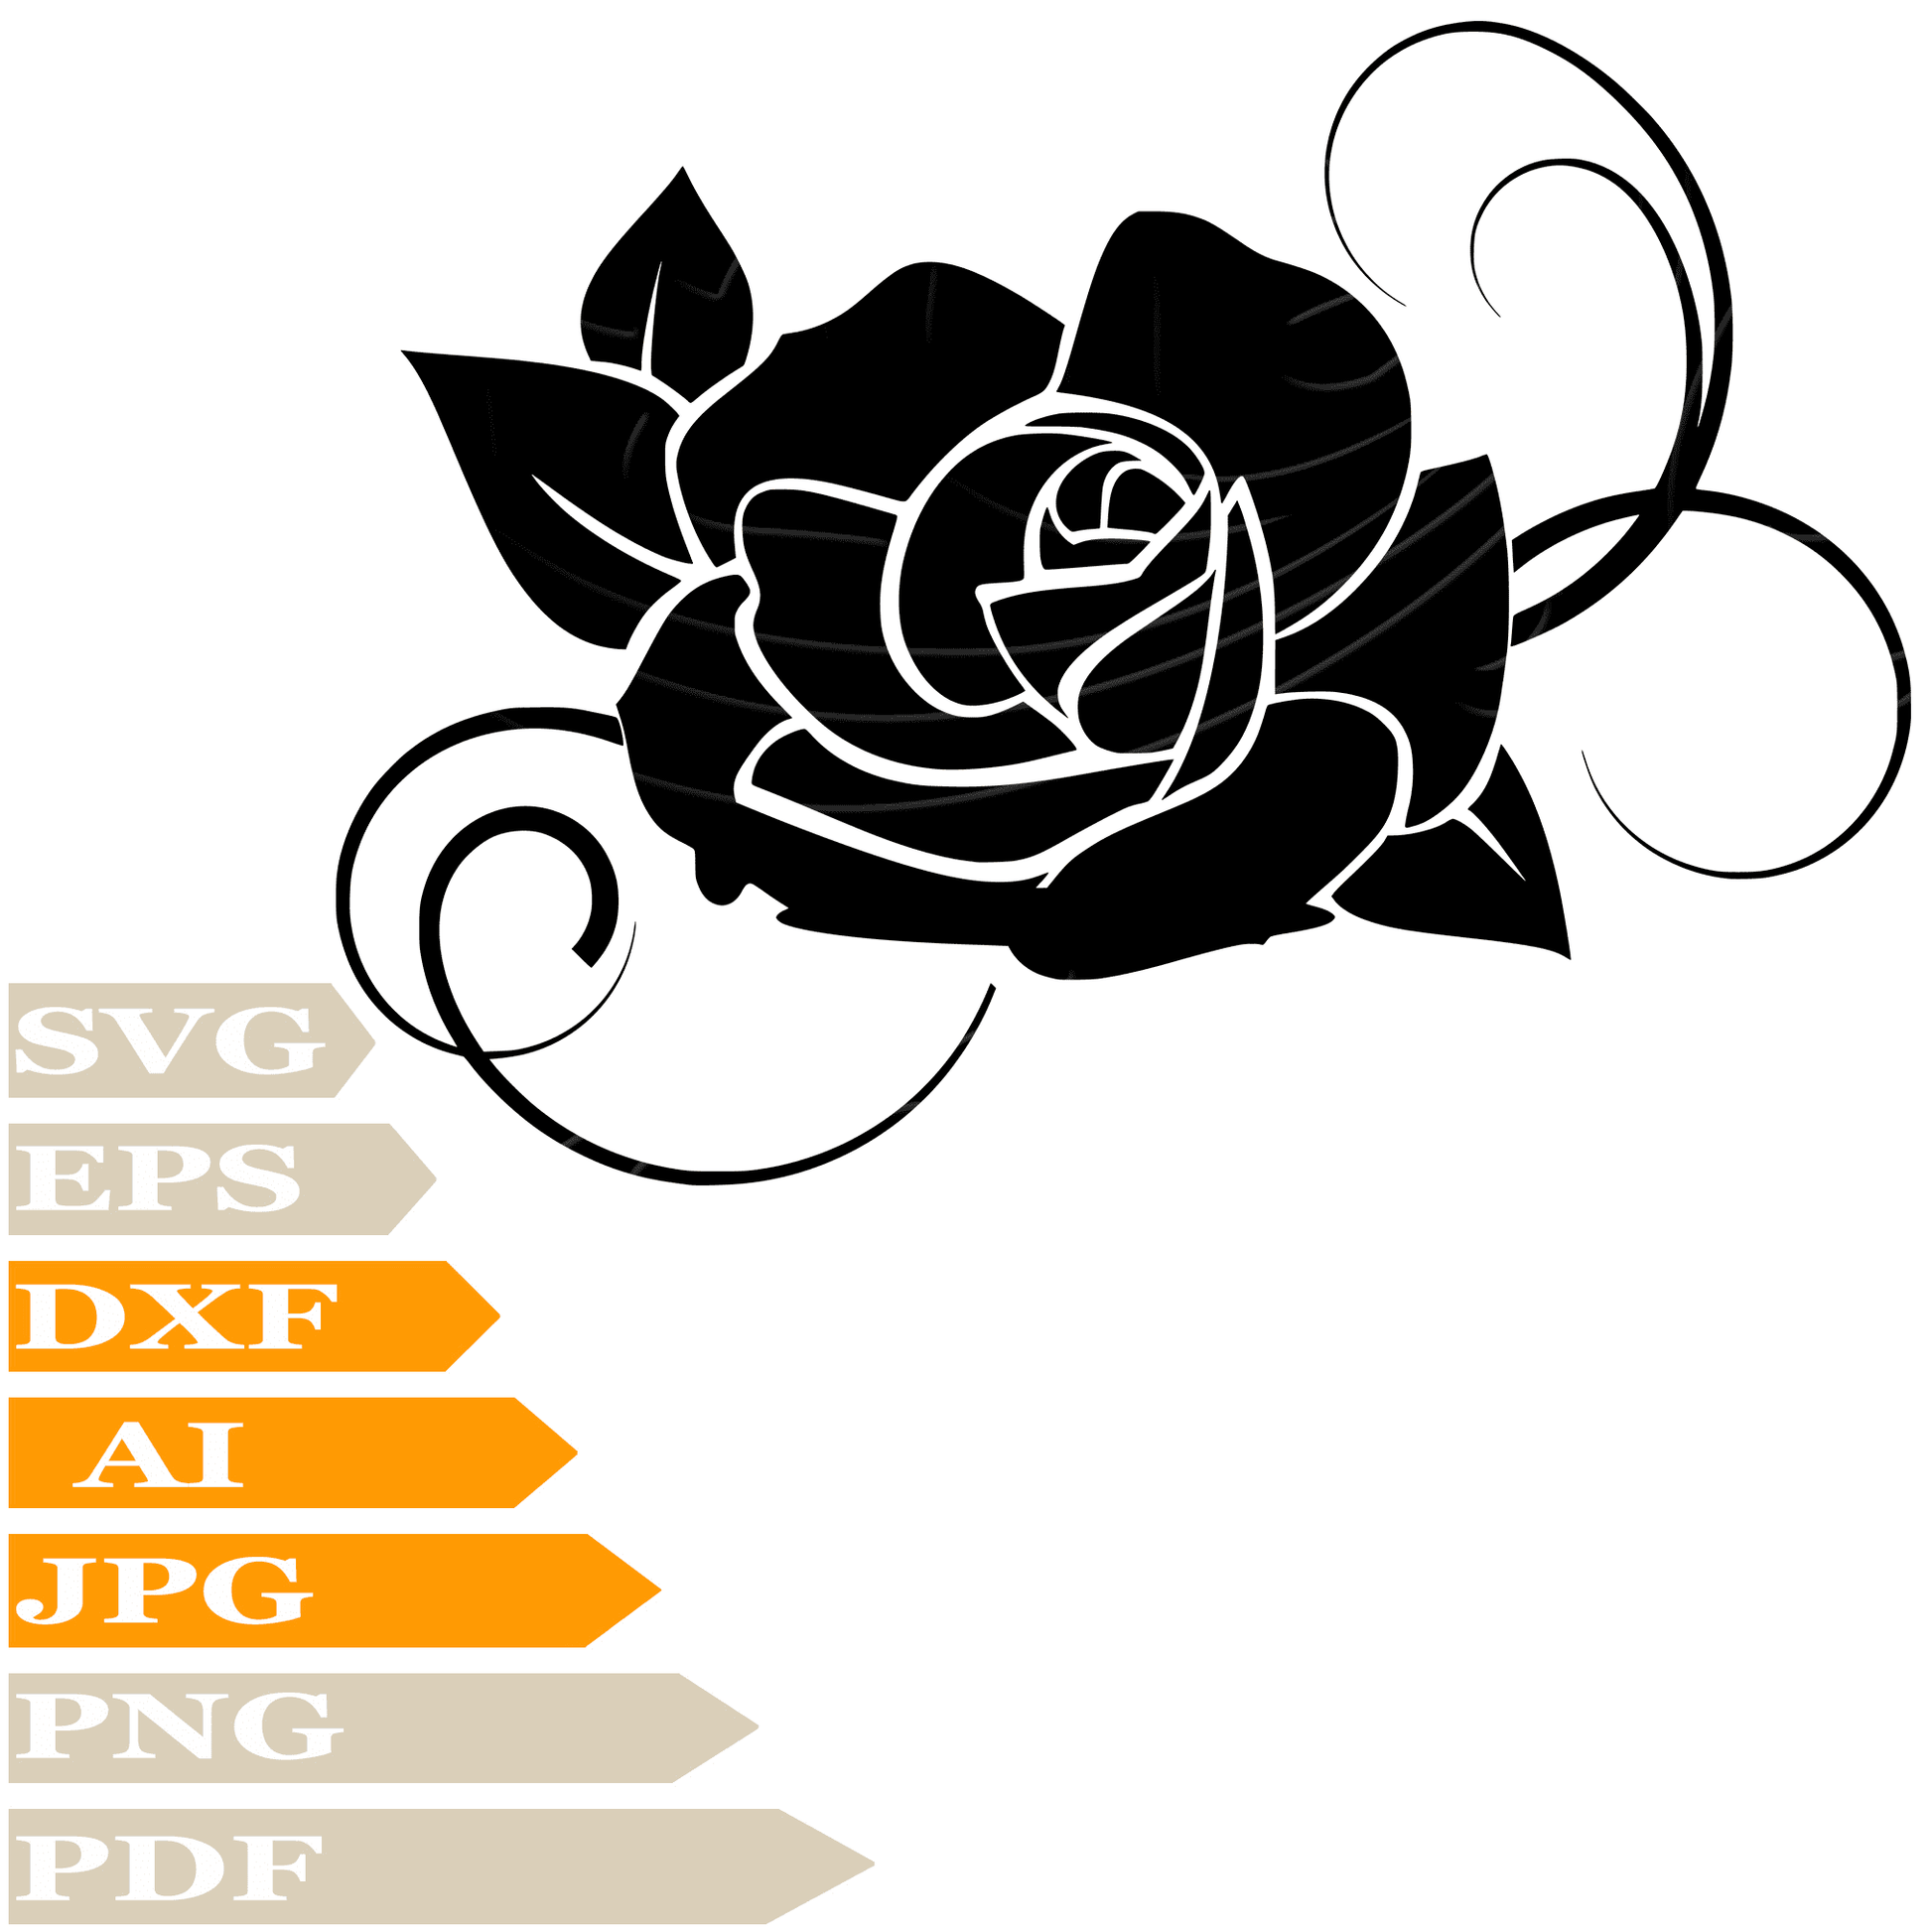 Rose SVG-Leaves With Roses Personalized SVG-Red Rose Drawing SVG-Flower Rose Vector Illustration-PNG-Decal-Cricut-Digital Files-Clip Art-Cut File-For Shirts-Silhouette